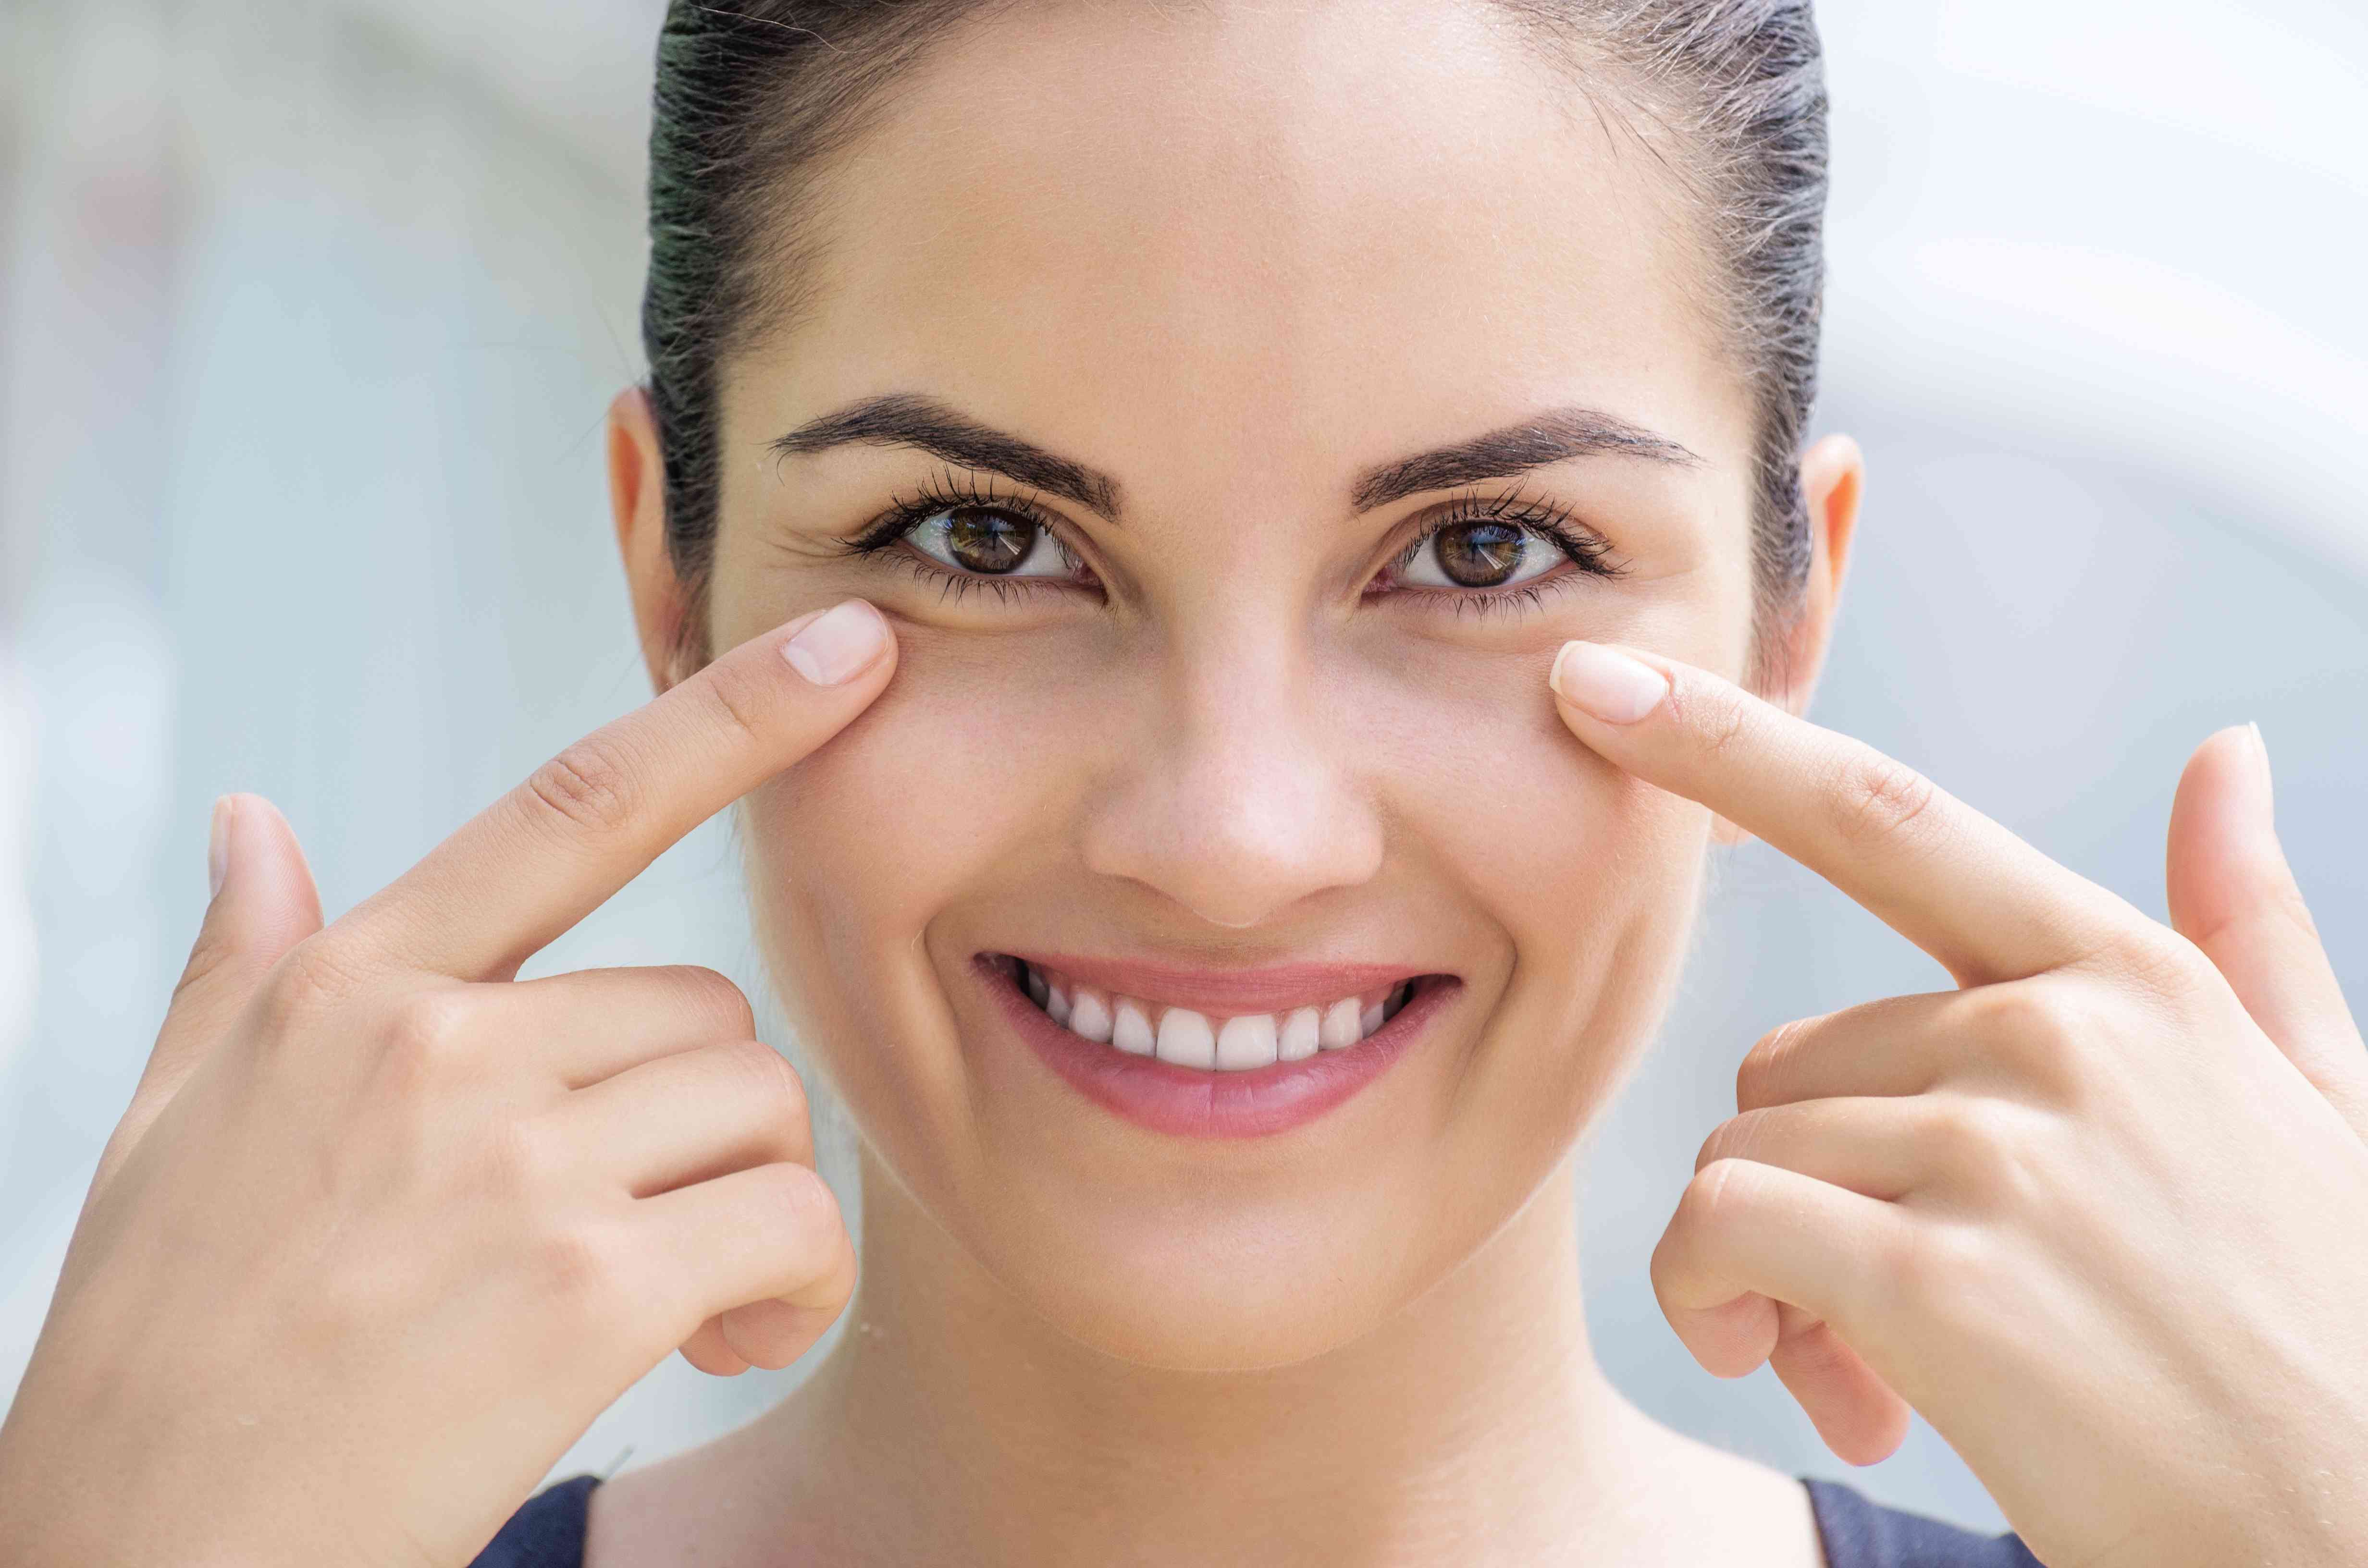 How to Choose the Right Eye Cream for Your Skin Type?